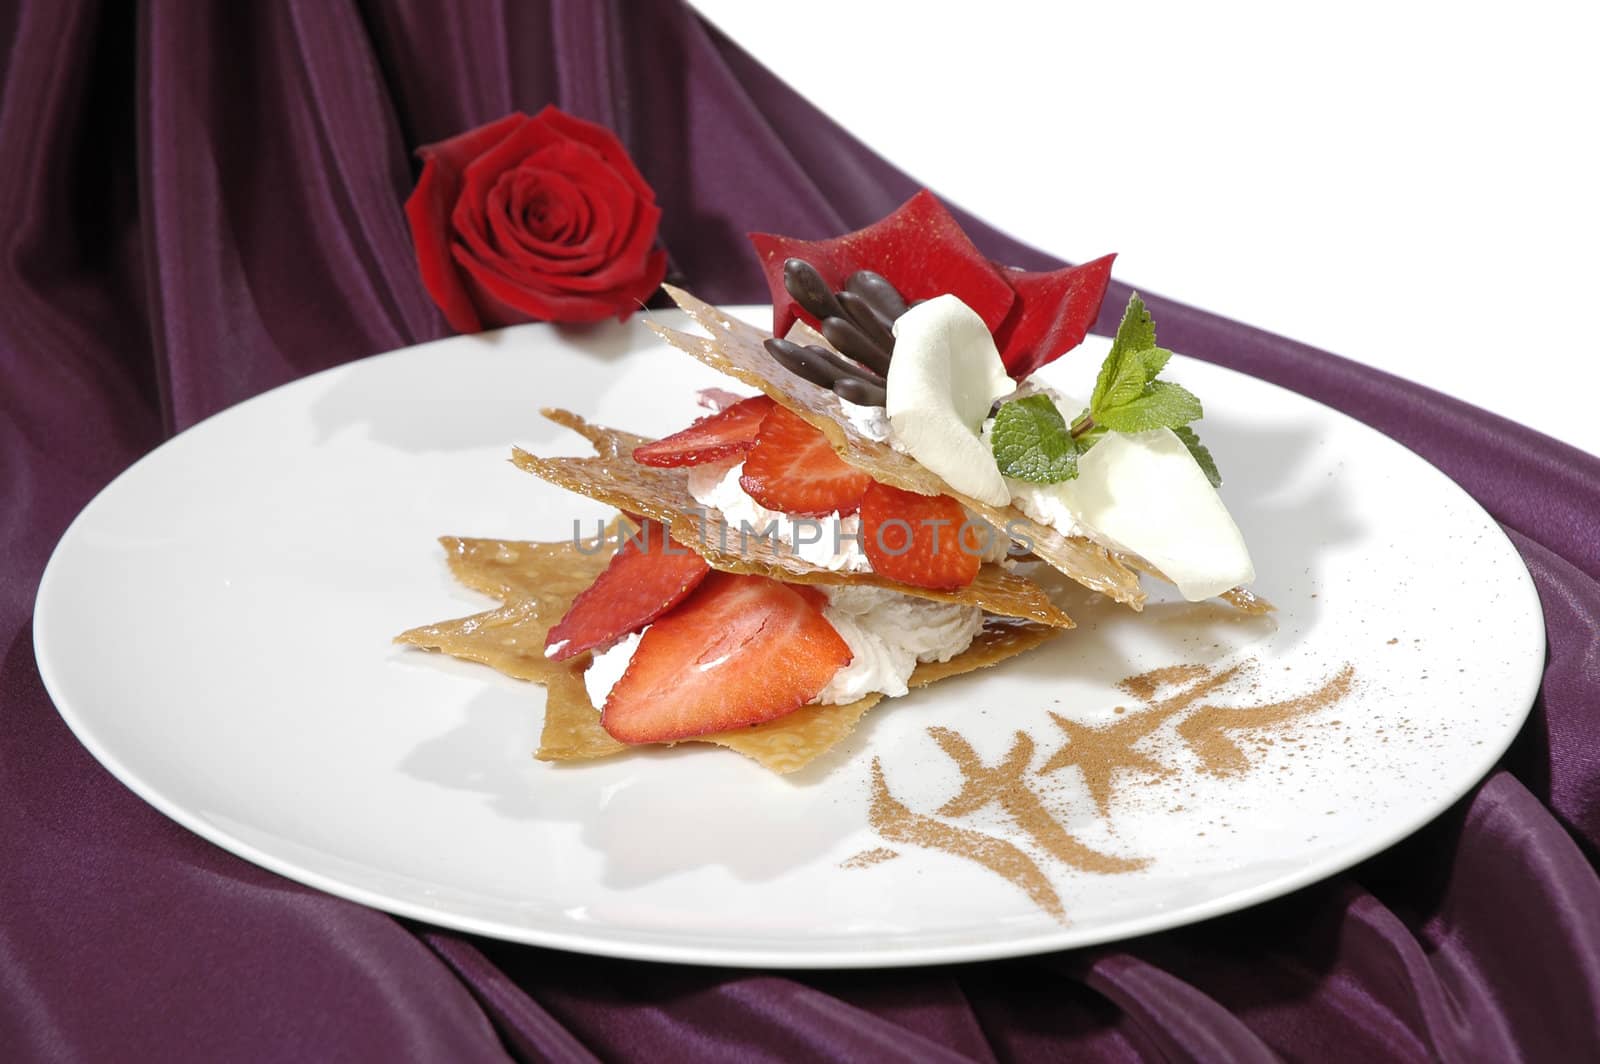 luxurious dessert for the romantic meetings